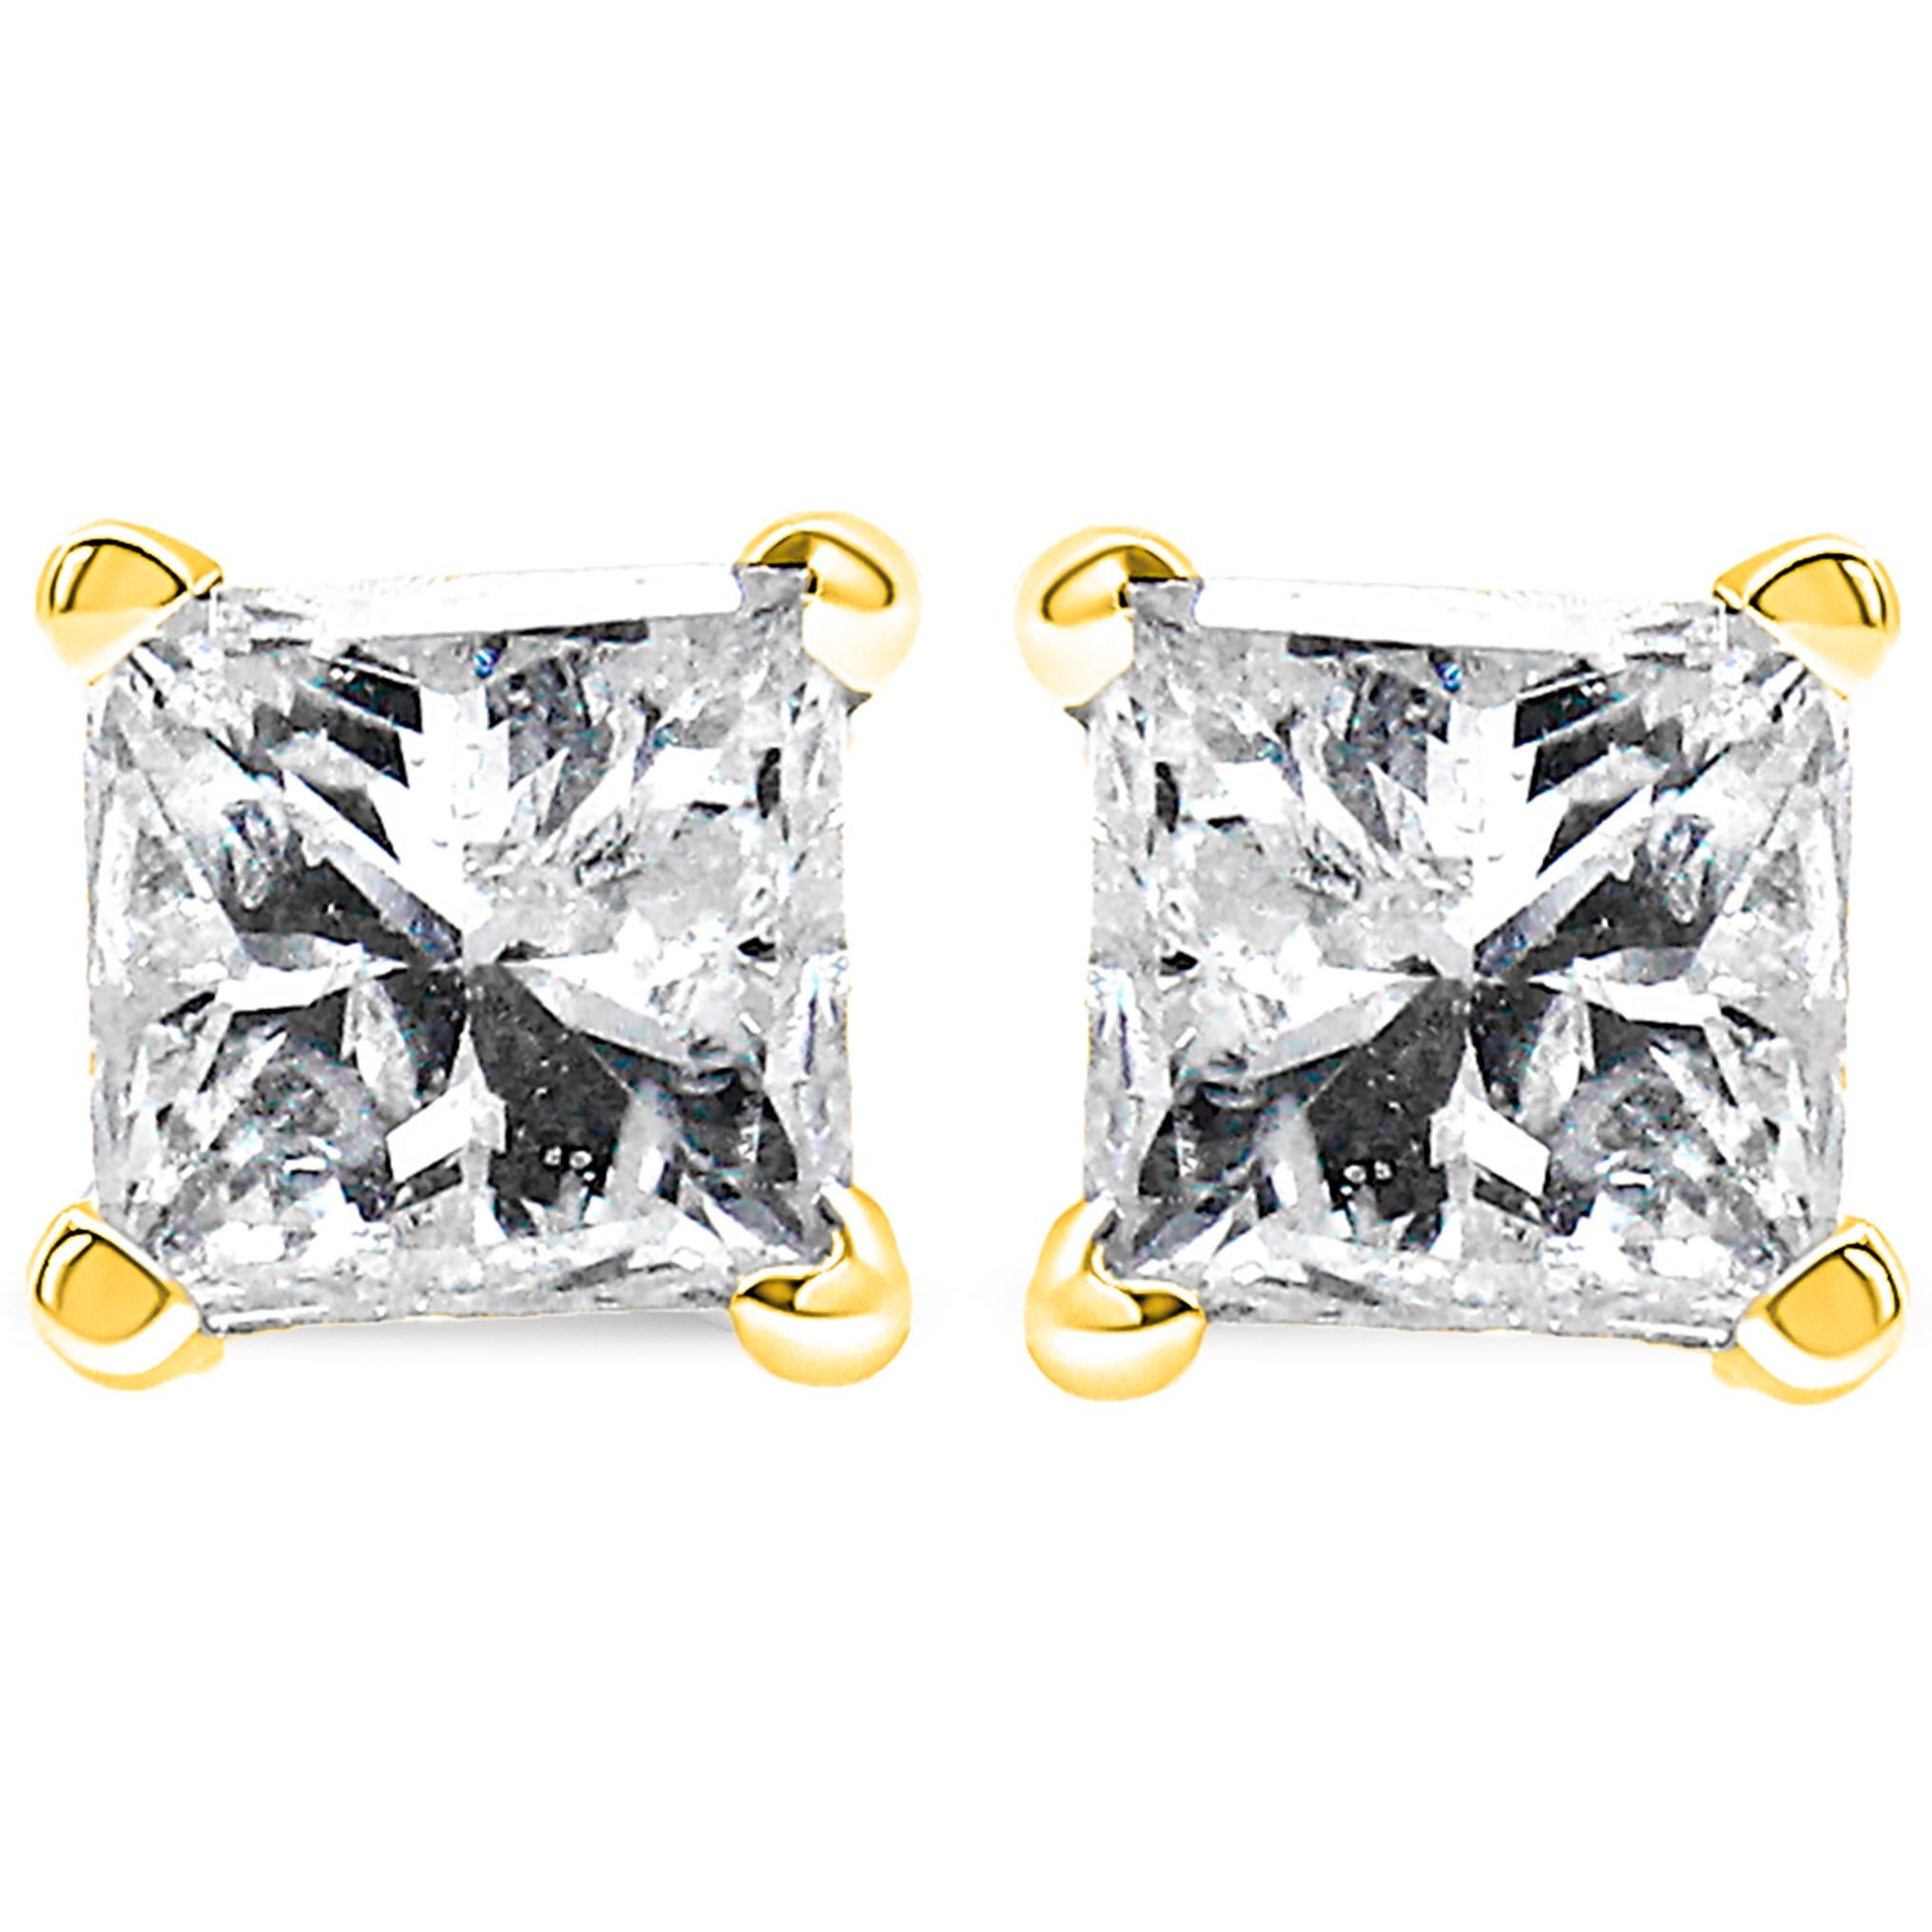 This pair of beautiful stud earrings features 2 clarity-enhanced princess-cut white diamonds in classic four-prong setting. These earrings are crafted of fine 14-karat Yellow gold and fasten securely with push-back clasps. These studs also come with